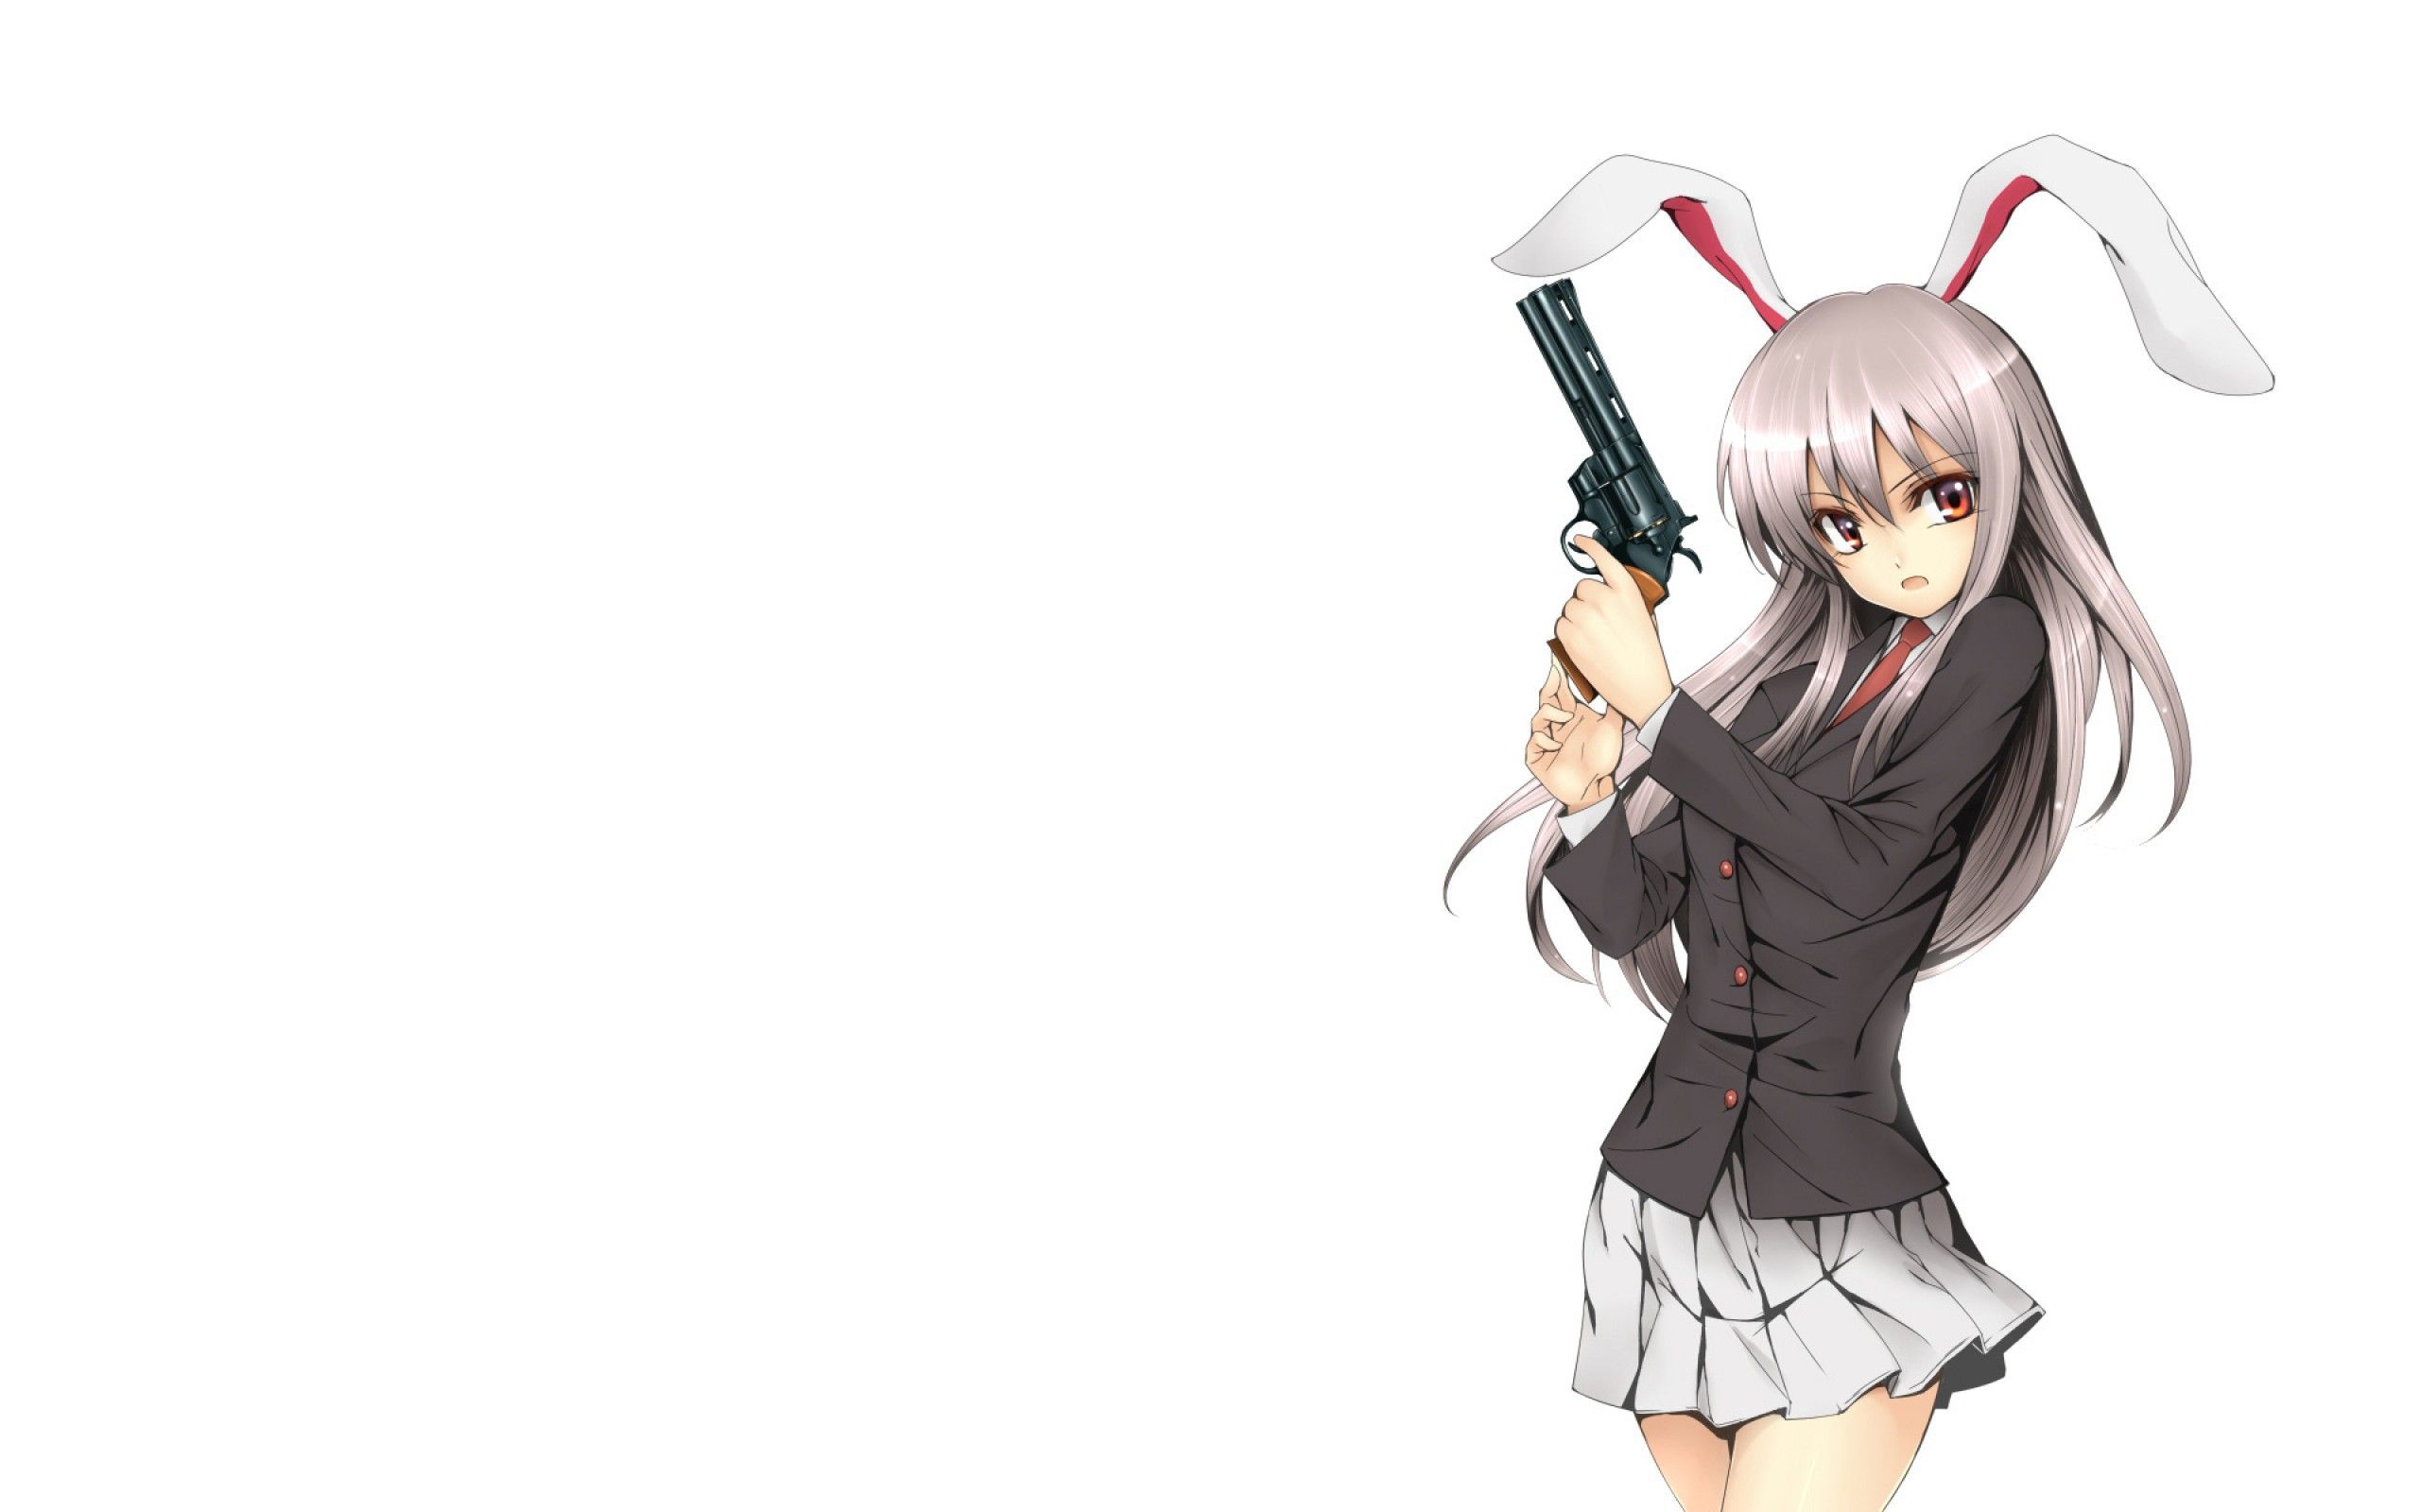 Anime Pistol Pointed Wallpaper Free Anime Pistol Pointed